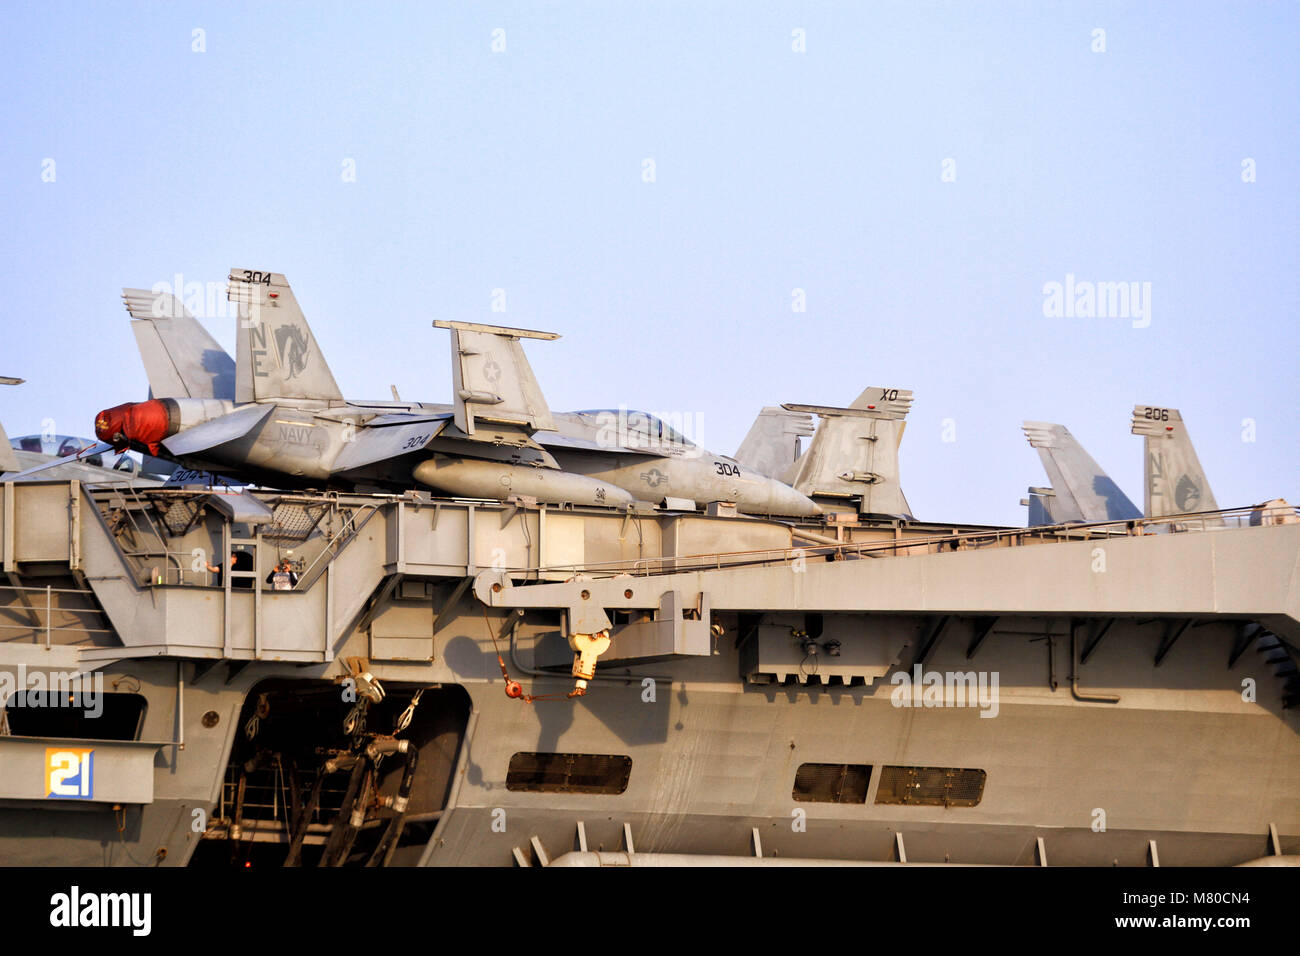 Jet fighters F/A-18 E/F Super Hornet on the carrier USS Carl Vinson Stock Photo